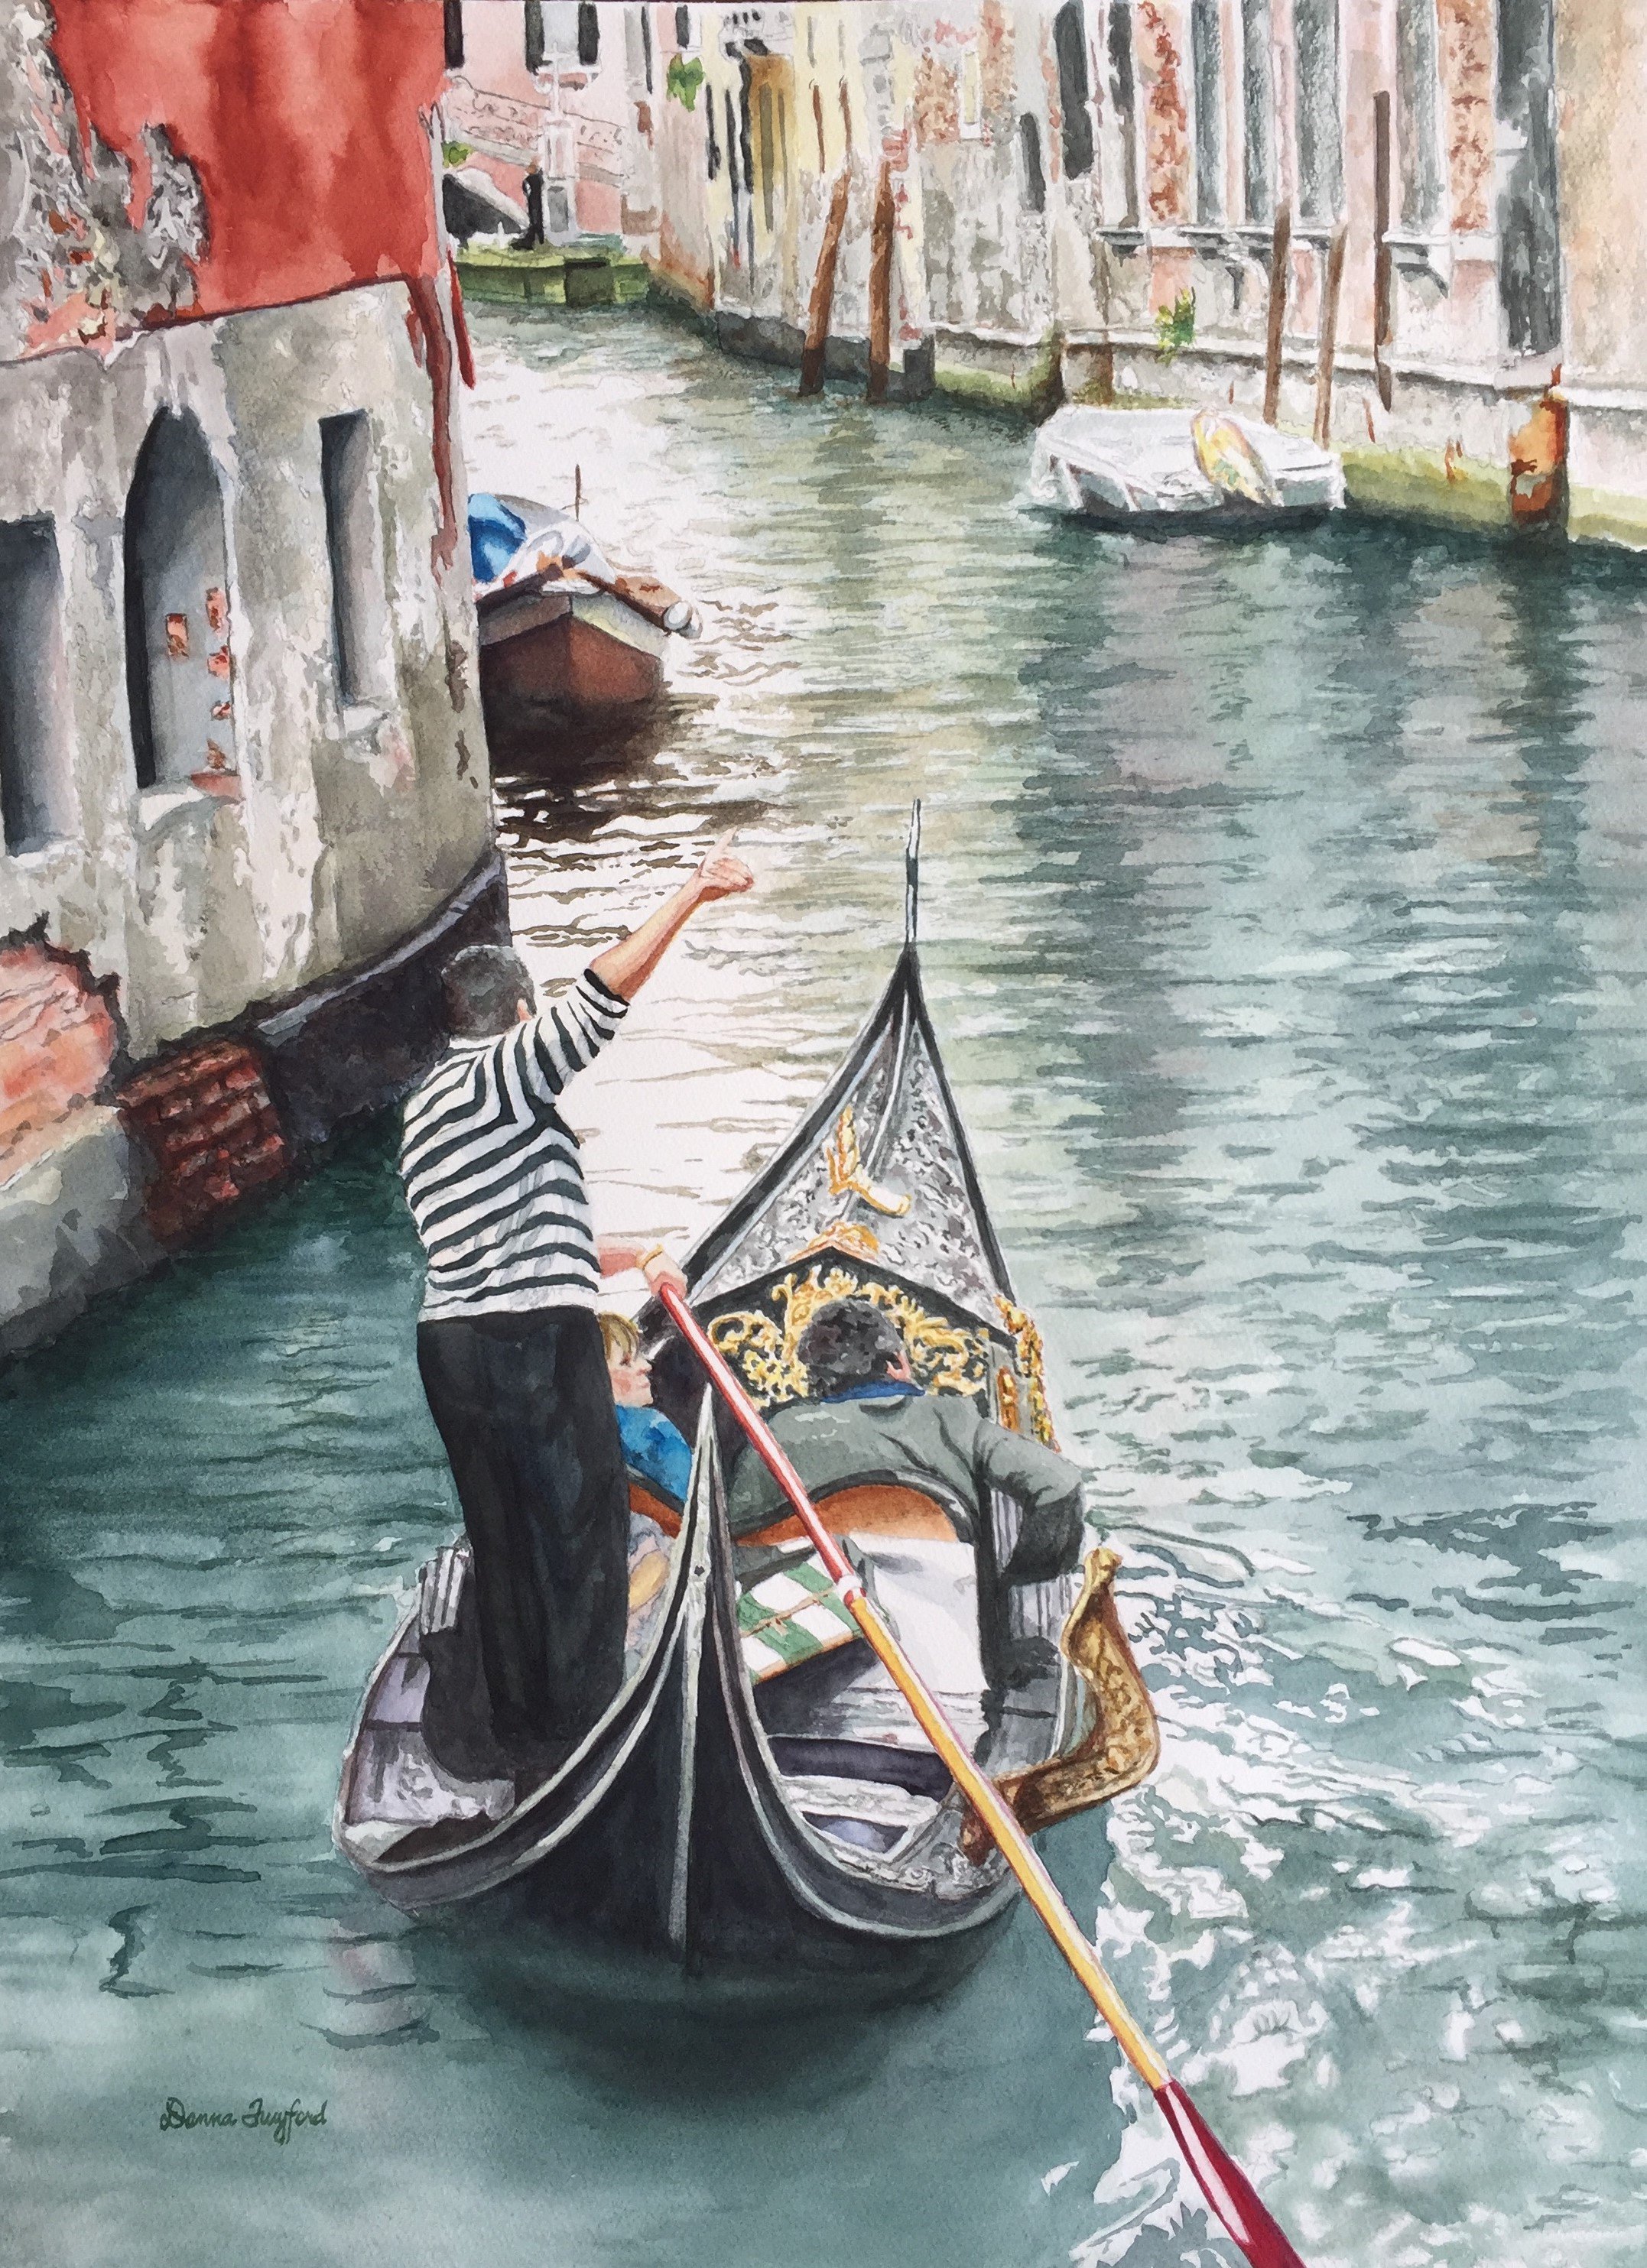    Venice Sightseeing  , 24” x 18”, watercolor on paper 